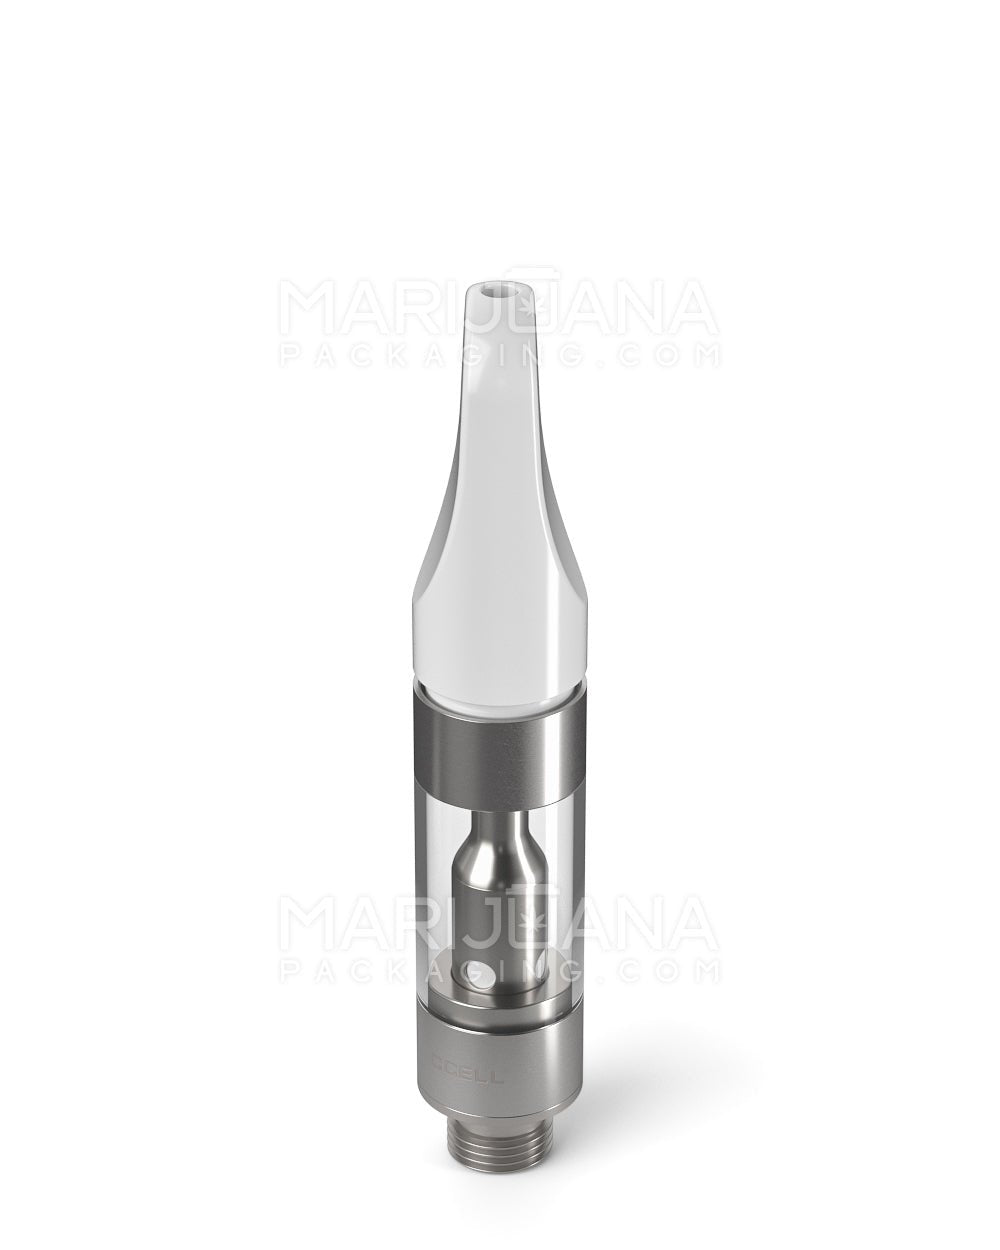 CCELL | Plastic Vape Cartridge with White Plastic Mouthpiece | 0.5mL - Press On - 100 Count - 4